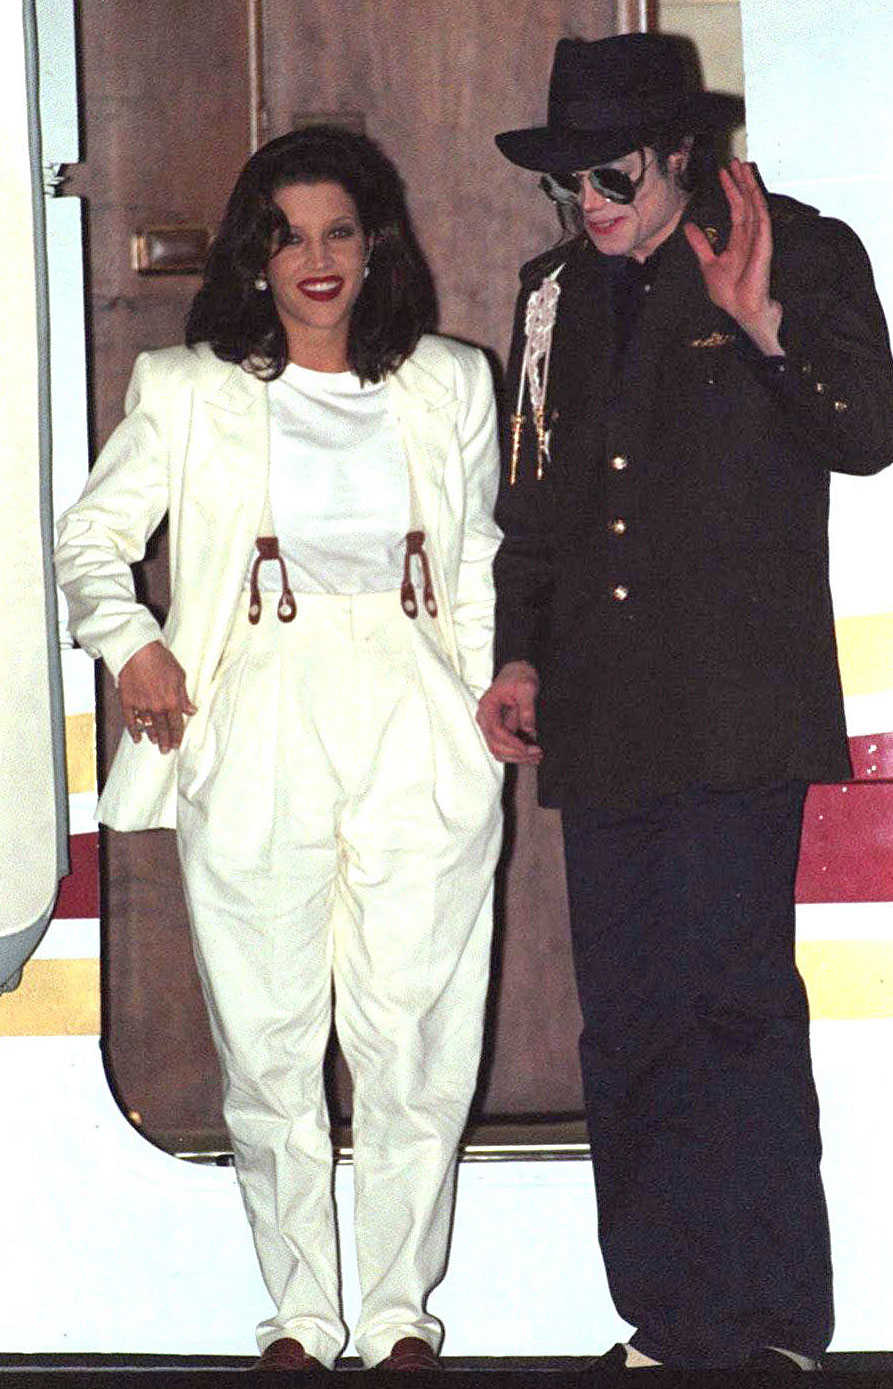 May 1994 Wedding Michael Jackson and Lisa Marie Presley A Timeline of Their Brief Marriage